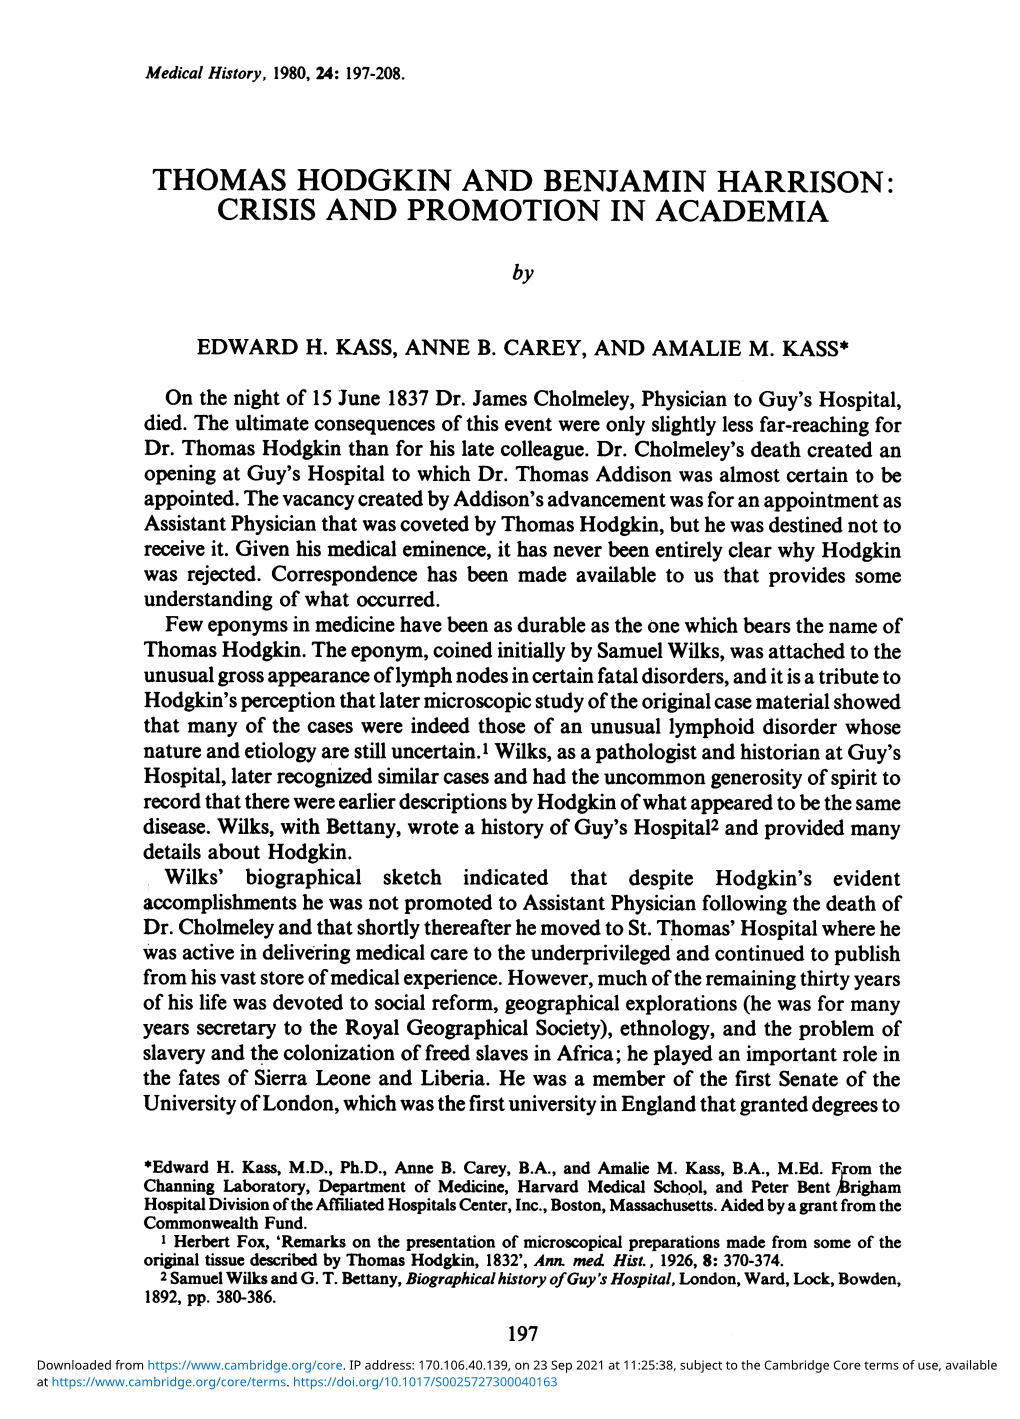 Thomas Hodgkin and Benjamin Harrison: Crisis and Promotion in Academia